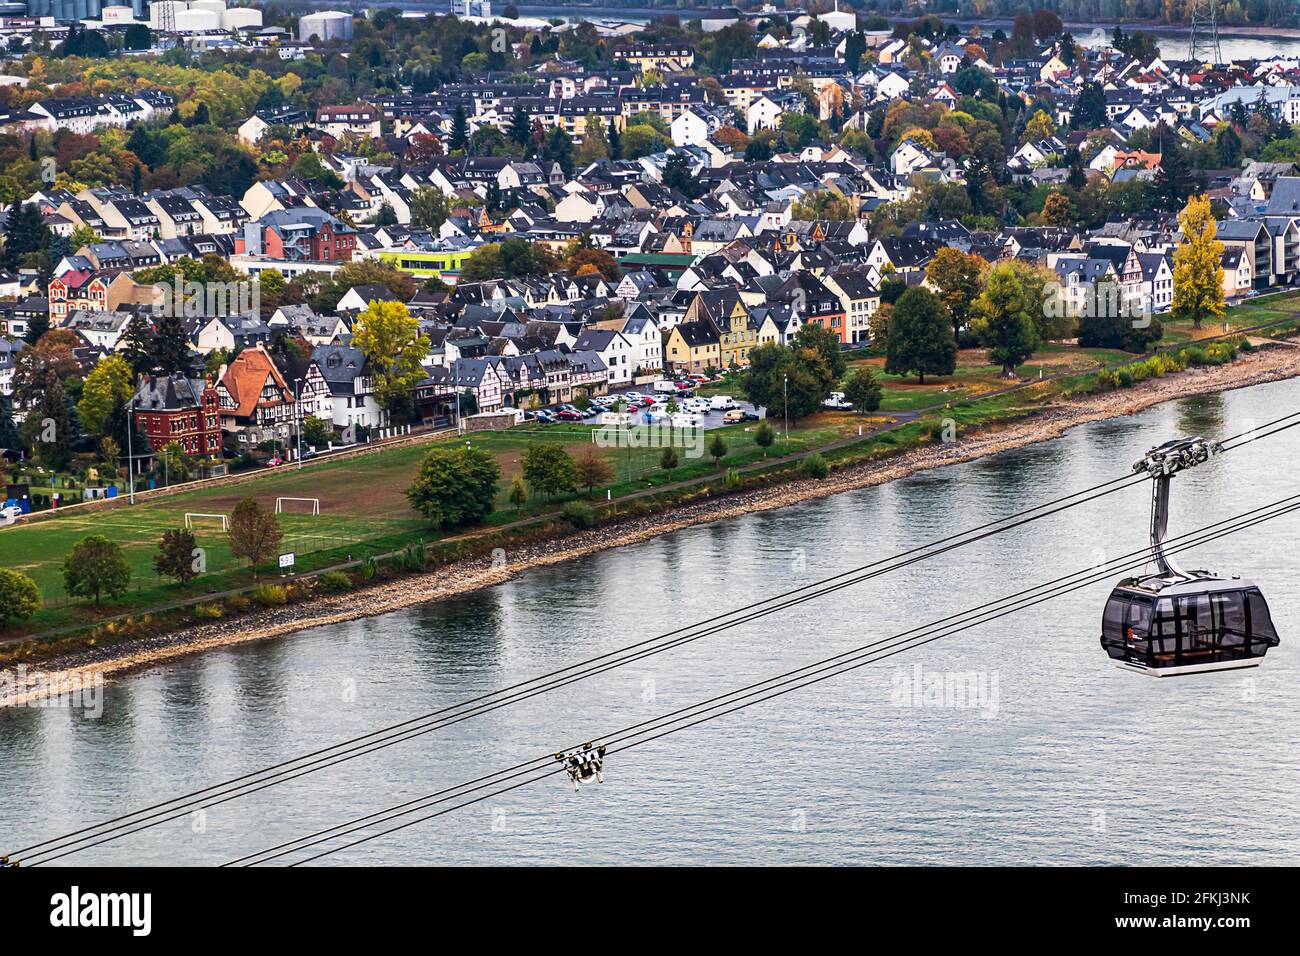 Panoramic view of Koblenz and Cable car across Rheine River, Deutsches Eck, Fortress Ehrenbreitstein, Germany Stock Photo